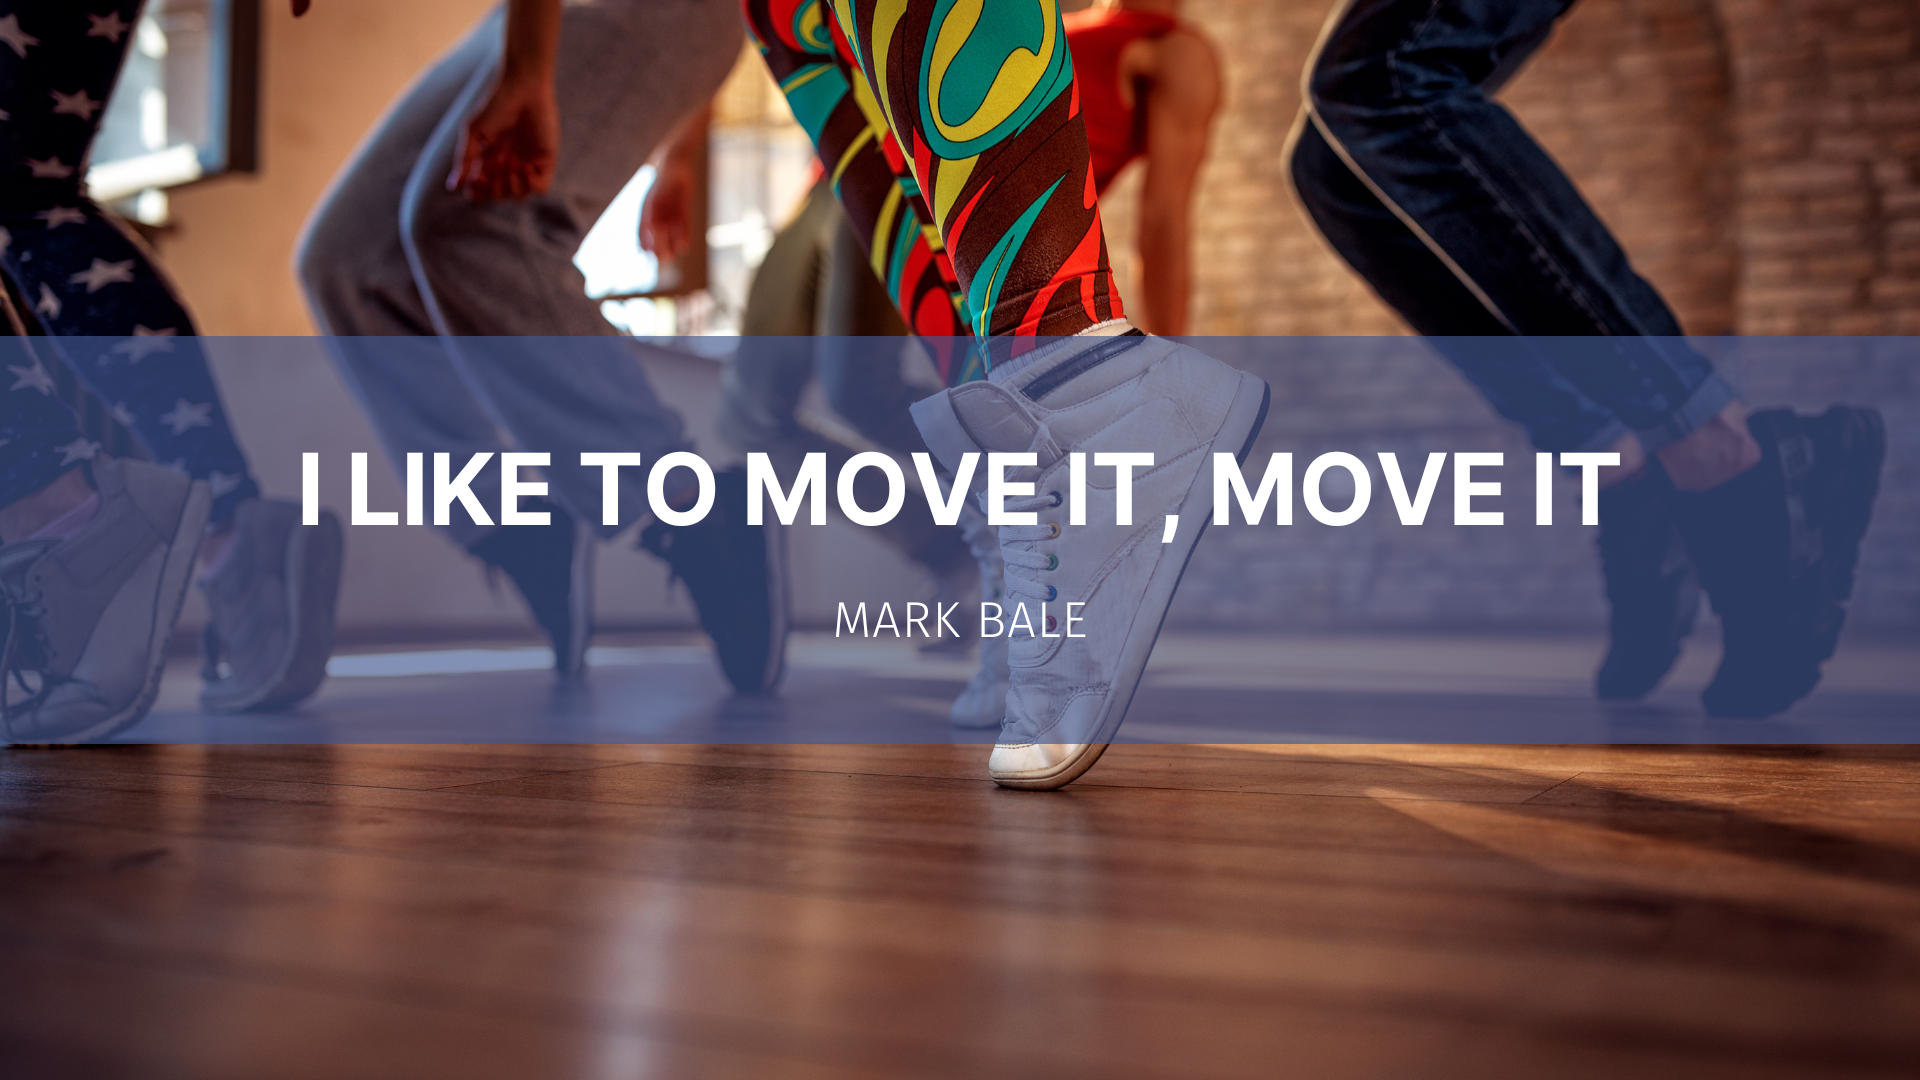 Featured image for “I like to move it, move it”